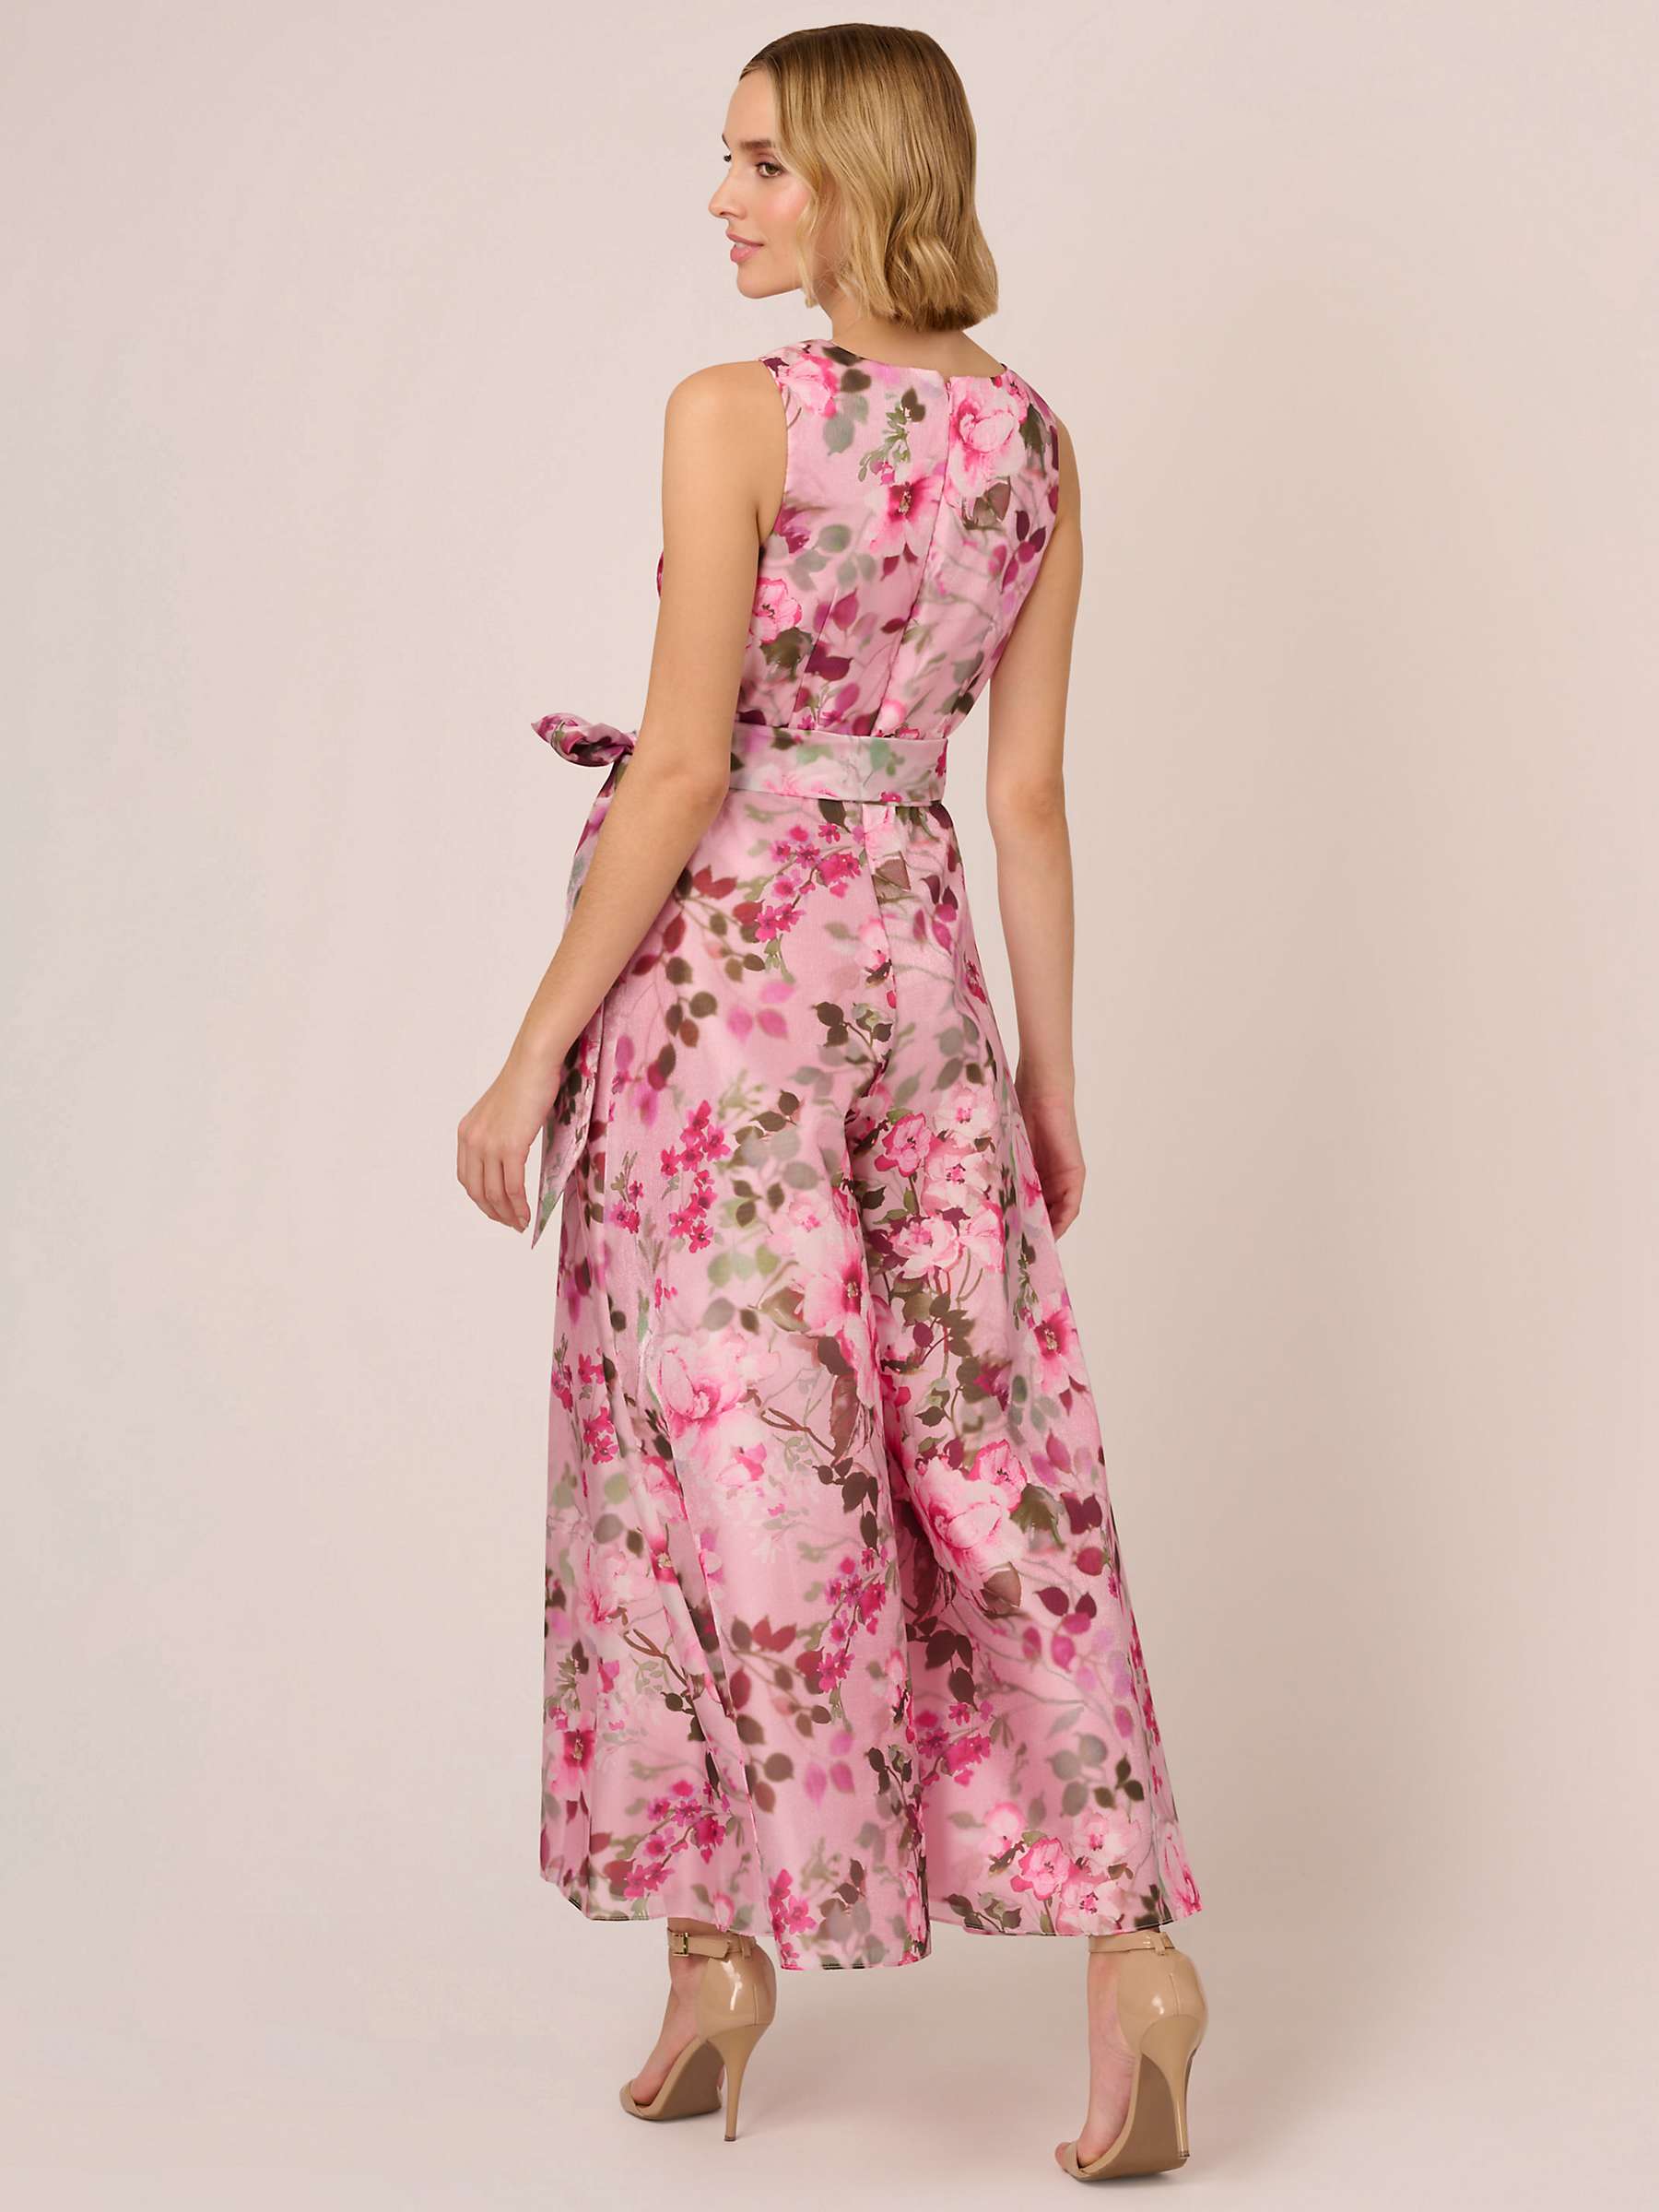 Buy Adrianna Papell Floral Sleeveless Jumpsuit, Pink/Multi Online at johnlewis.com